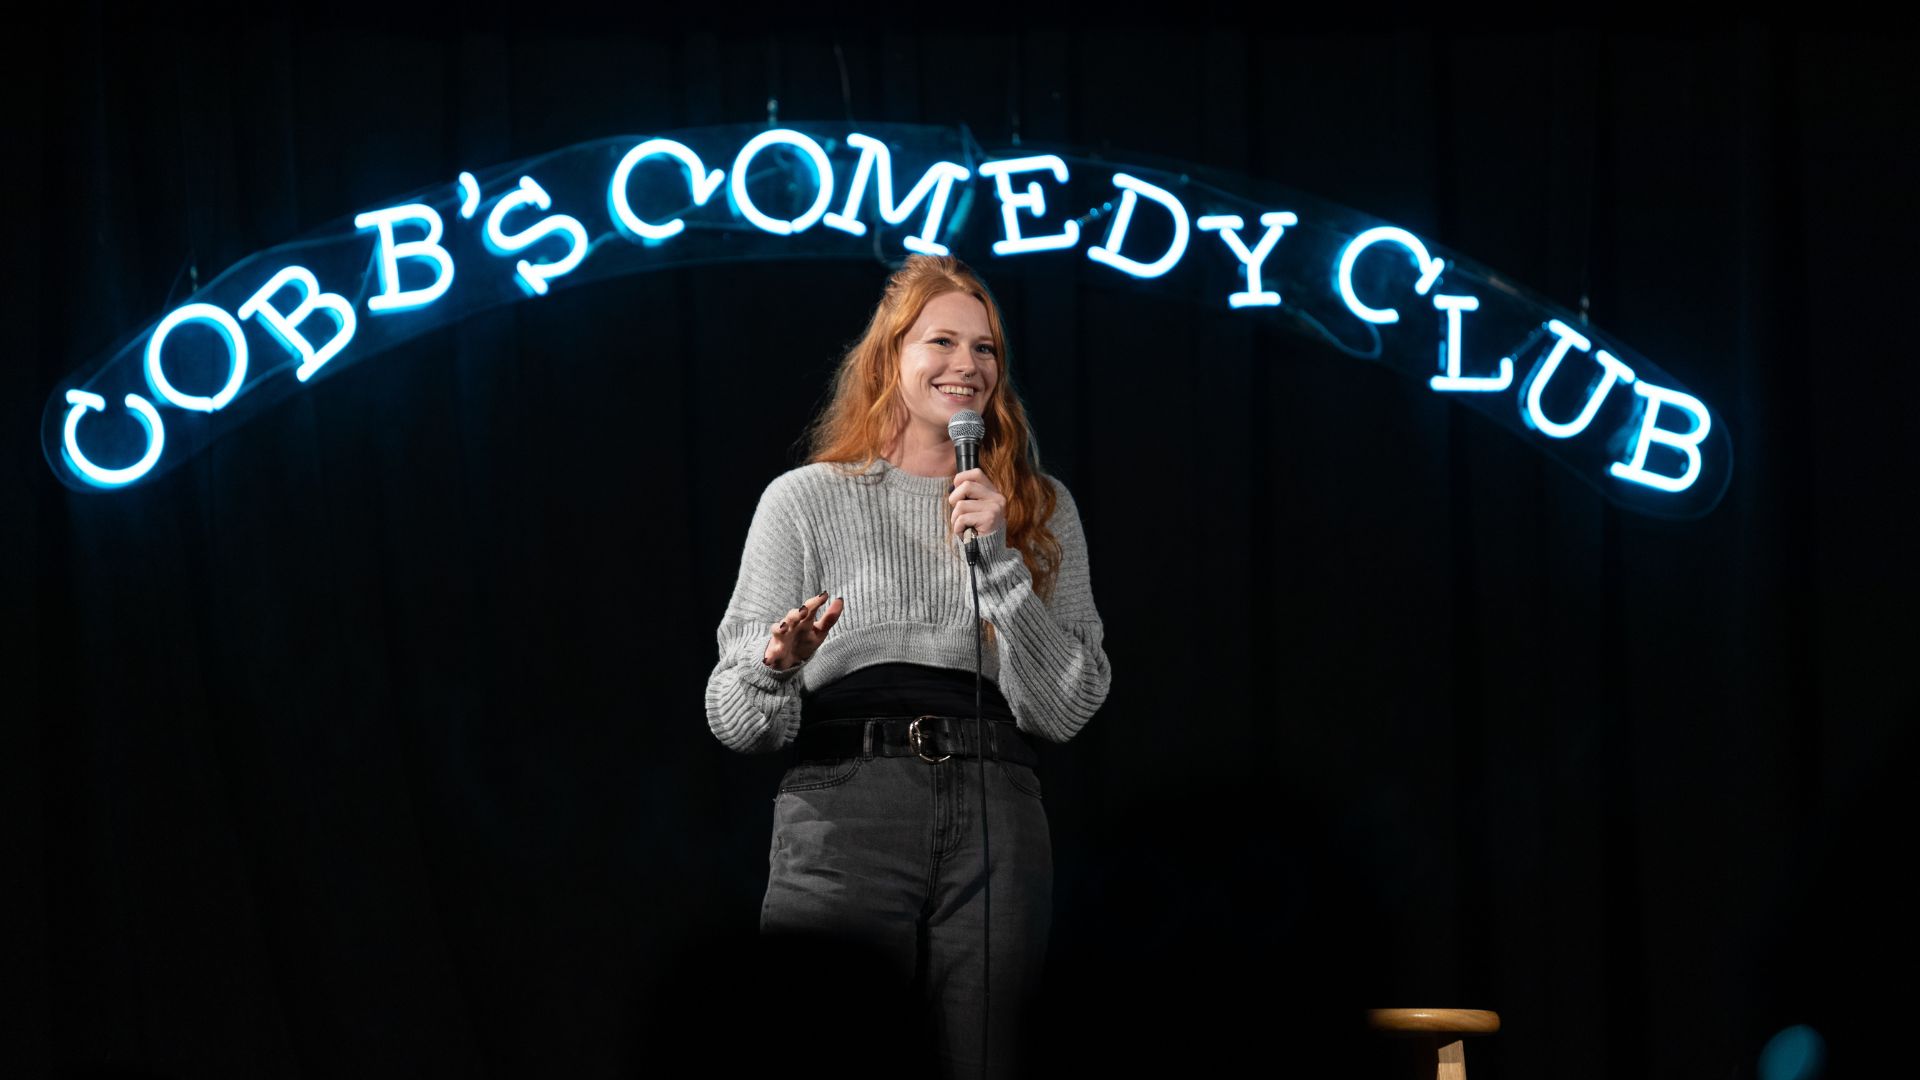 EMILY RUDOLPH, “RISING STAR” SET TO HEADLINE AT COBB’S COMEDY CLUB–AN UNMISSABLE EVENT IN SAN FRANCISCO